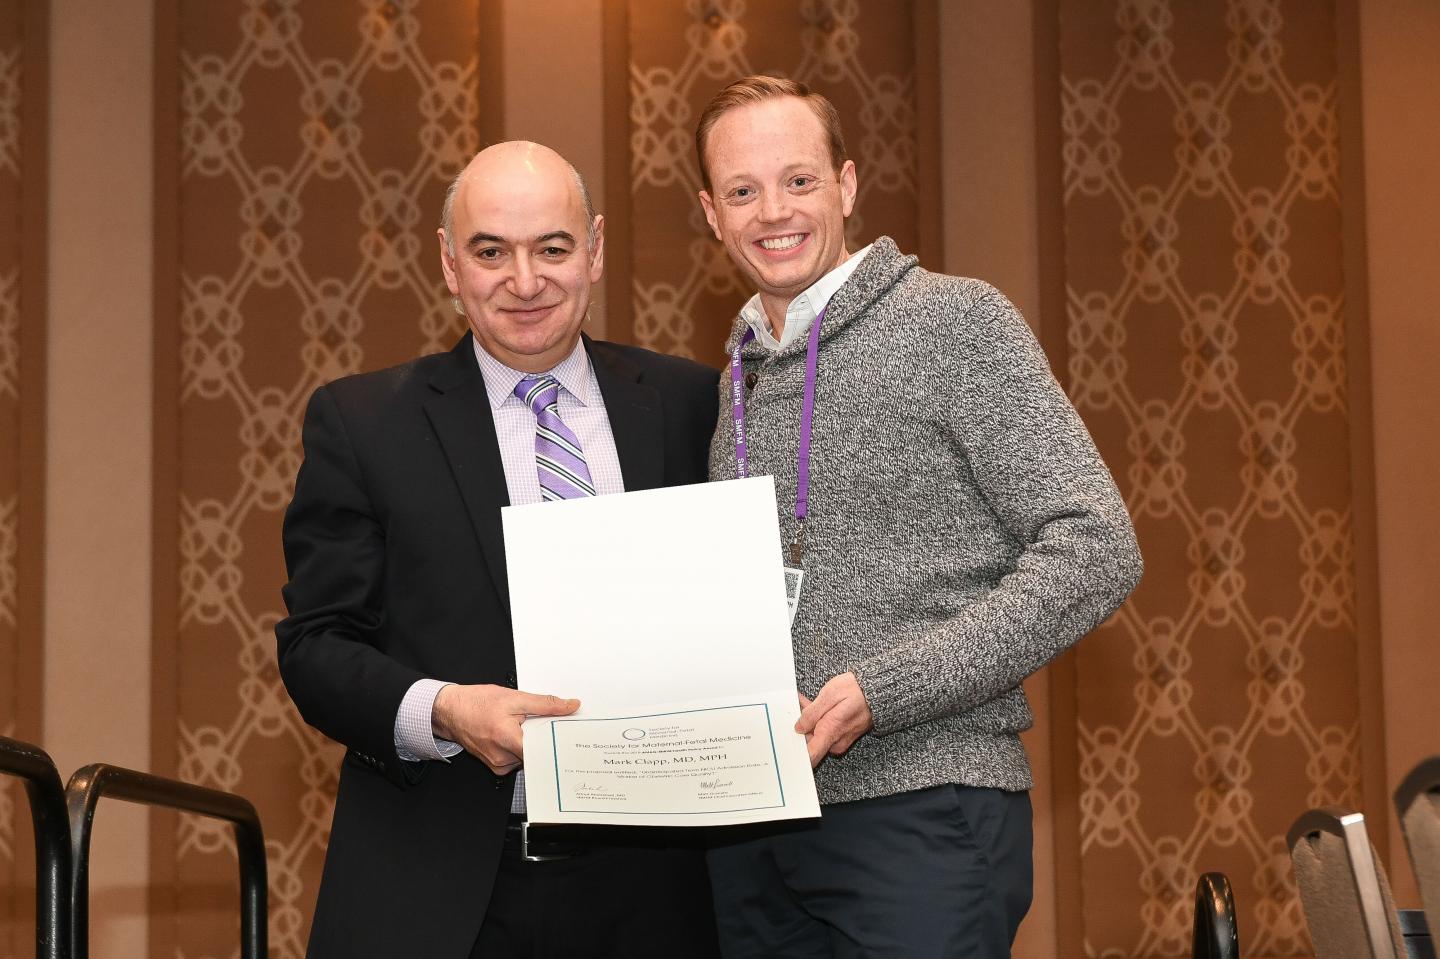 Dr. Mark Clapp Receives Award from Dr. George Saade